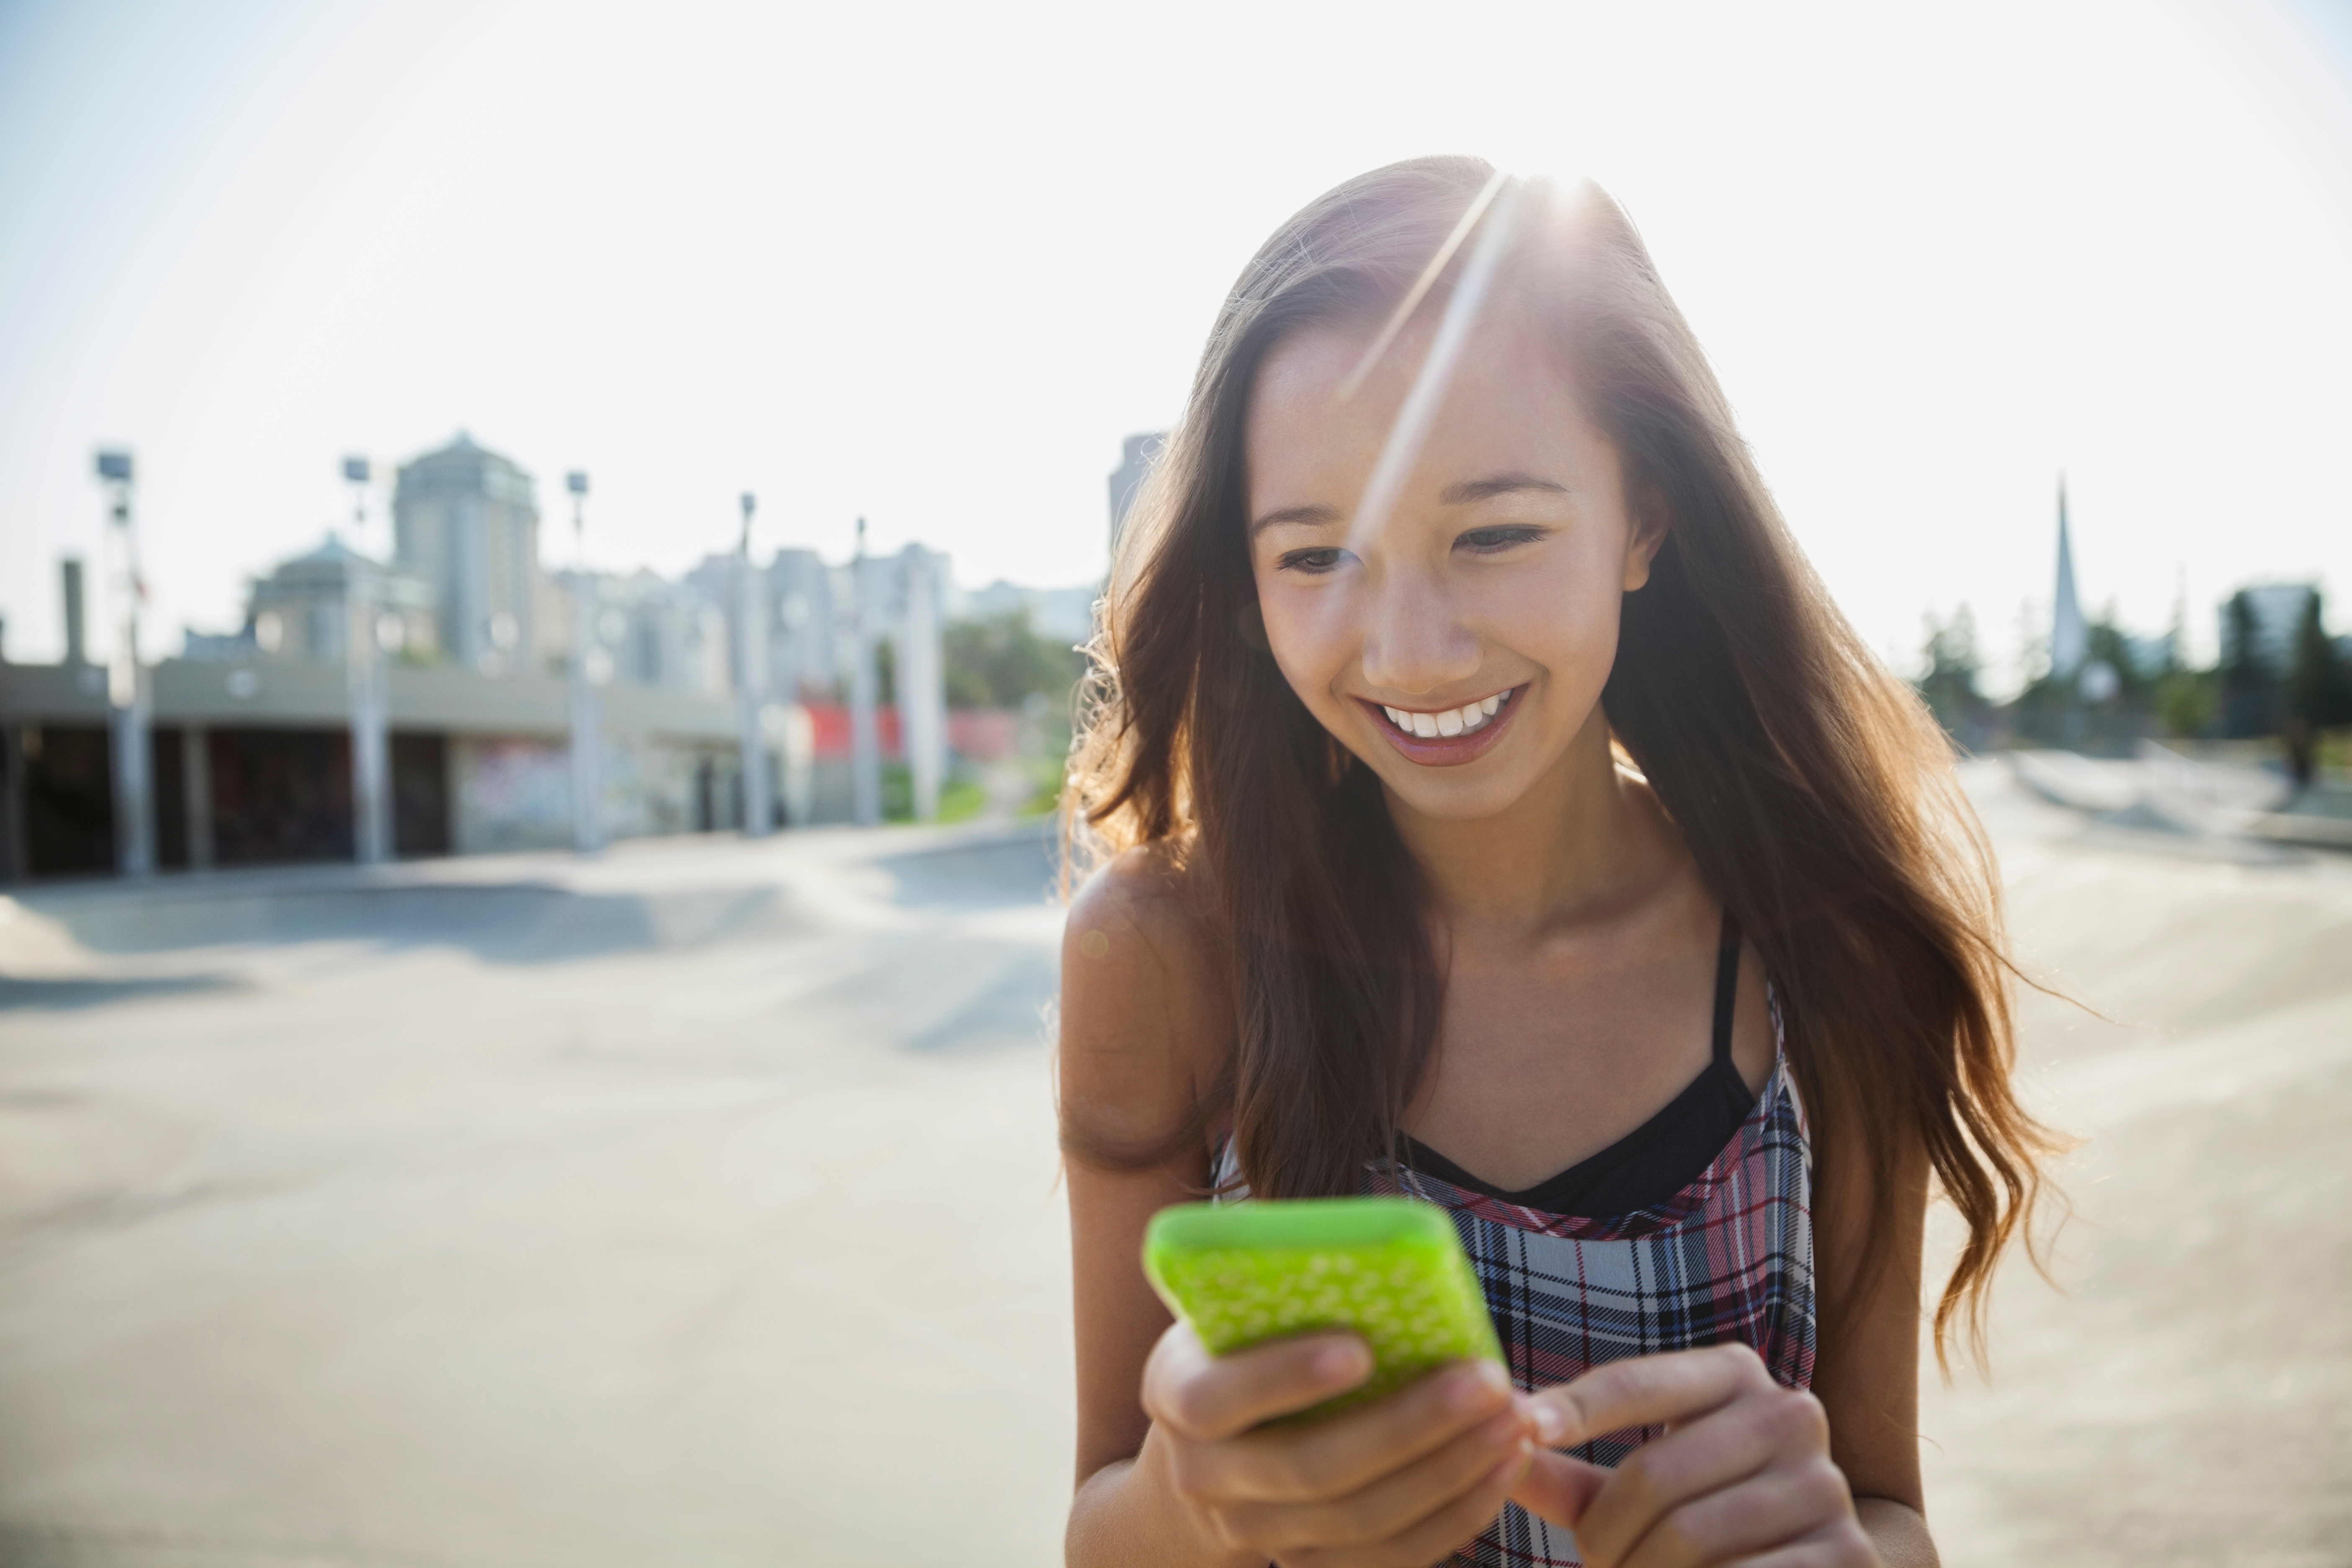 A smiling young girl on her green phone. A smiling young girl on her green mobile phone.